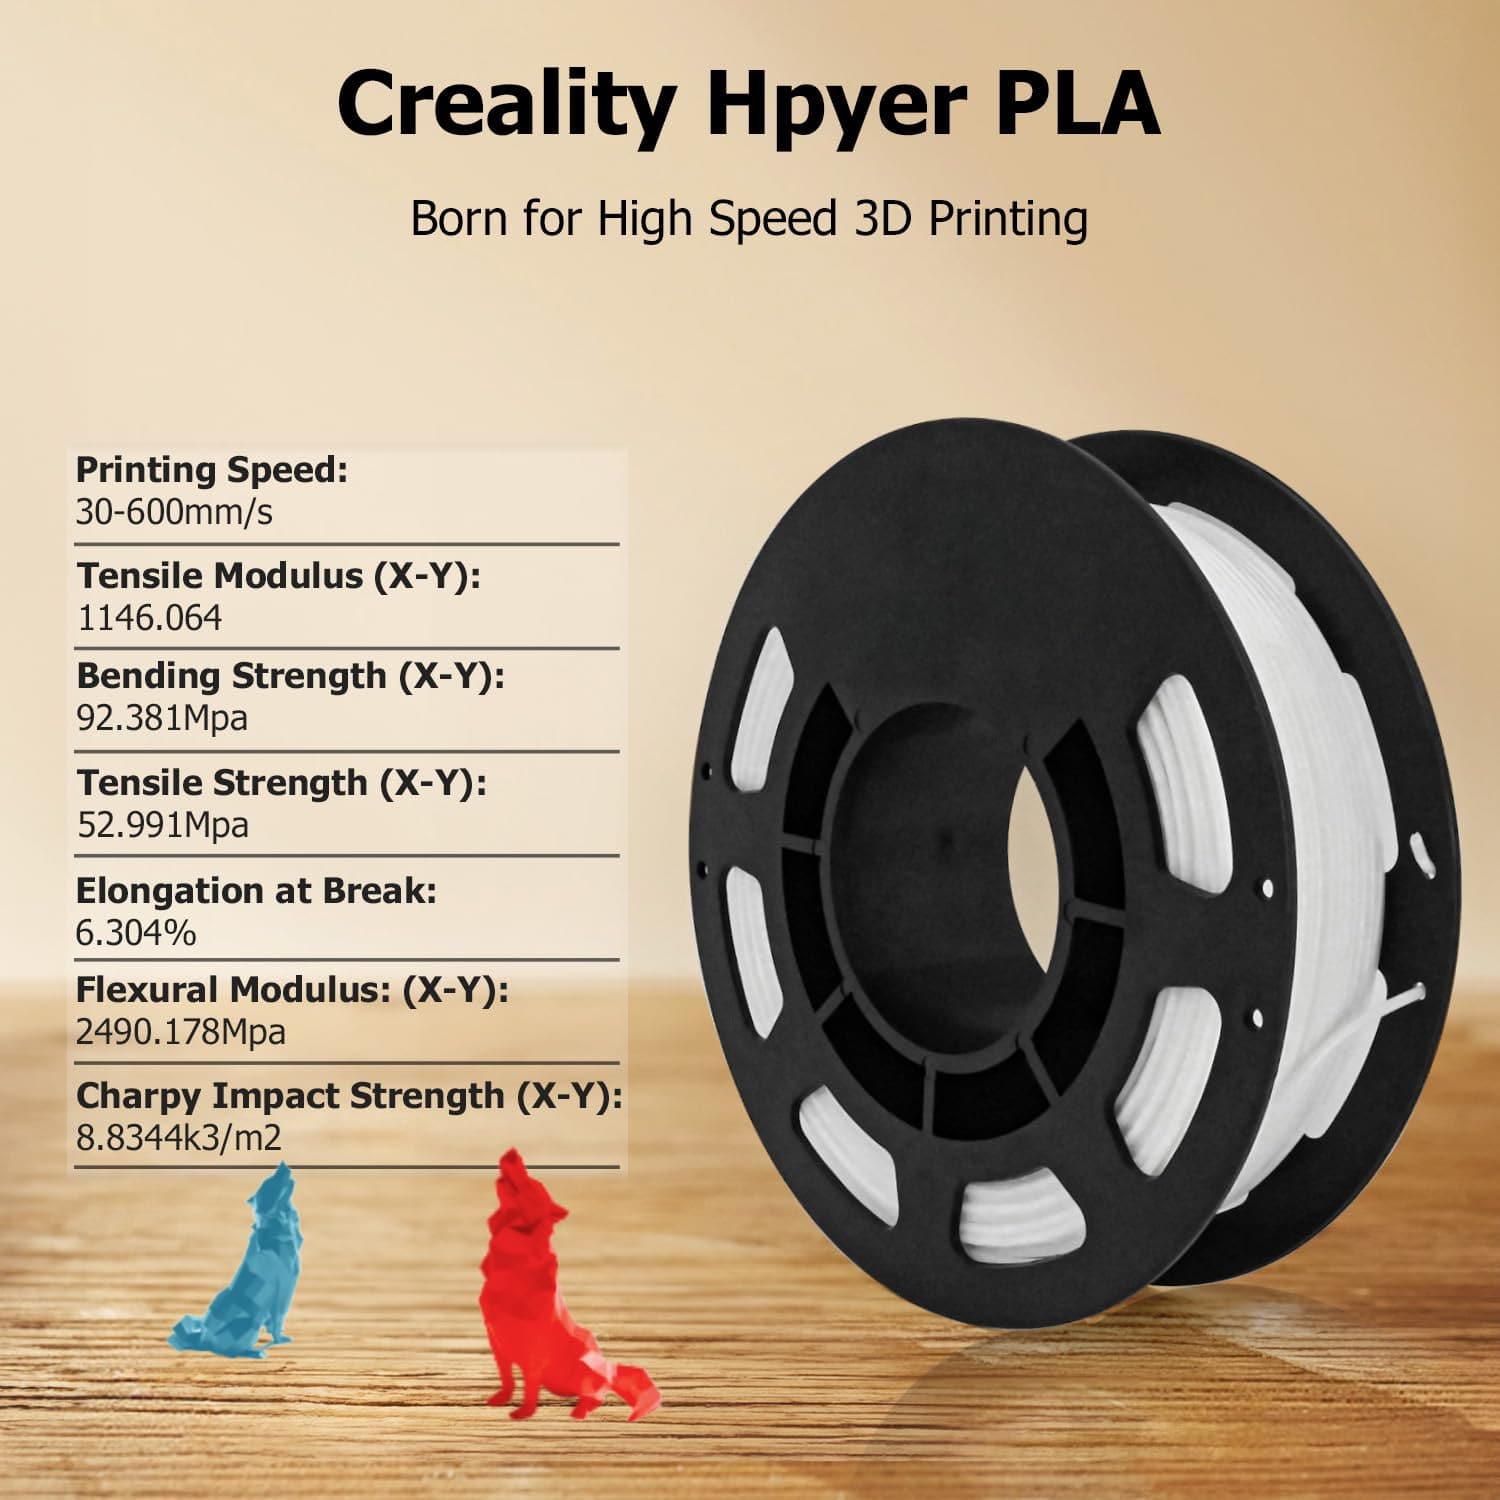 Creality PLA Filament Pro Grey, 1.75mm 3D Printer Filament, Ender PLA +  (Plus) Printing Filament, 1kg(2.2lbs)/Spool, Dimensional Accuracy ±0.03mm.  Fit